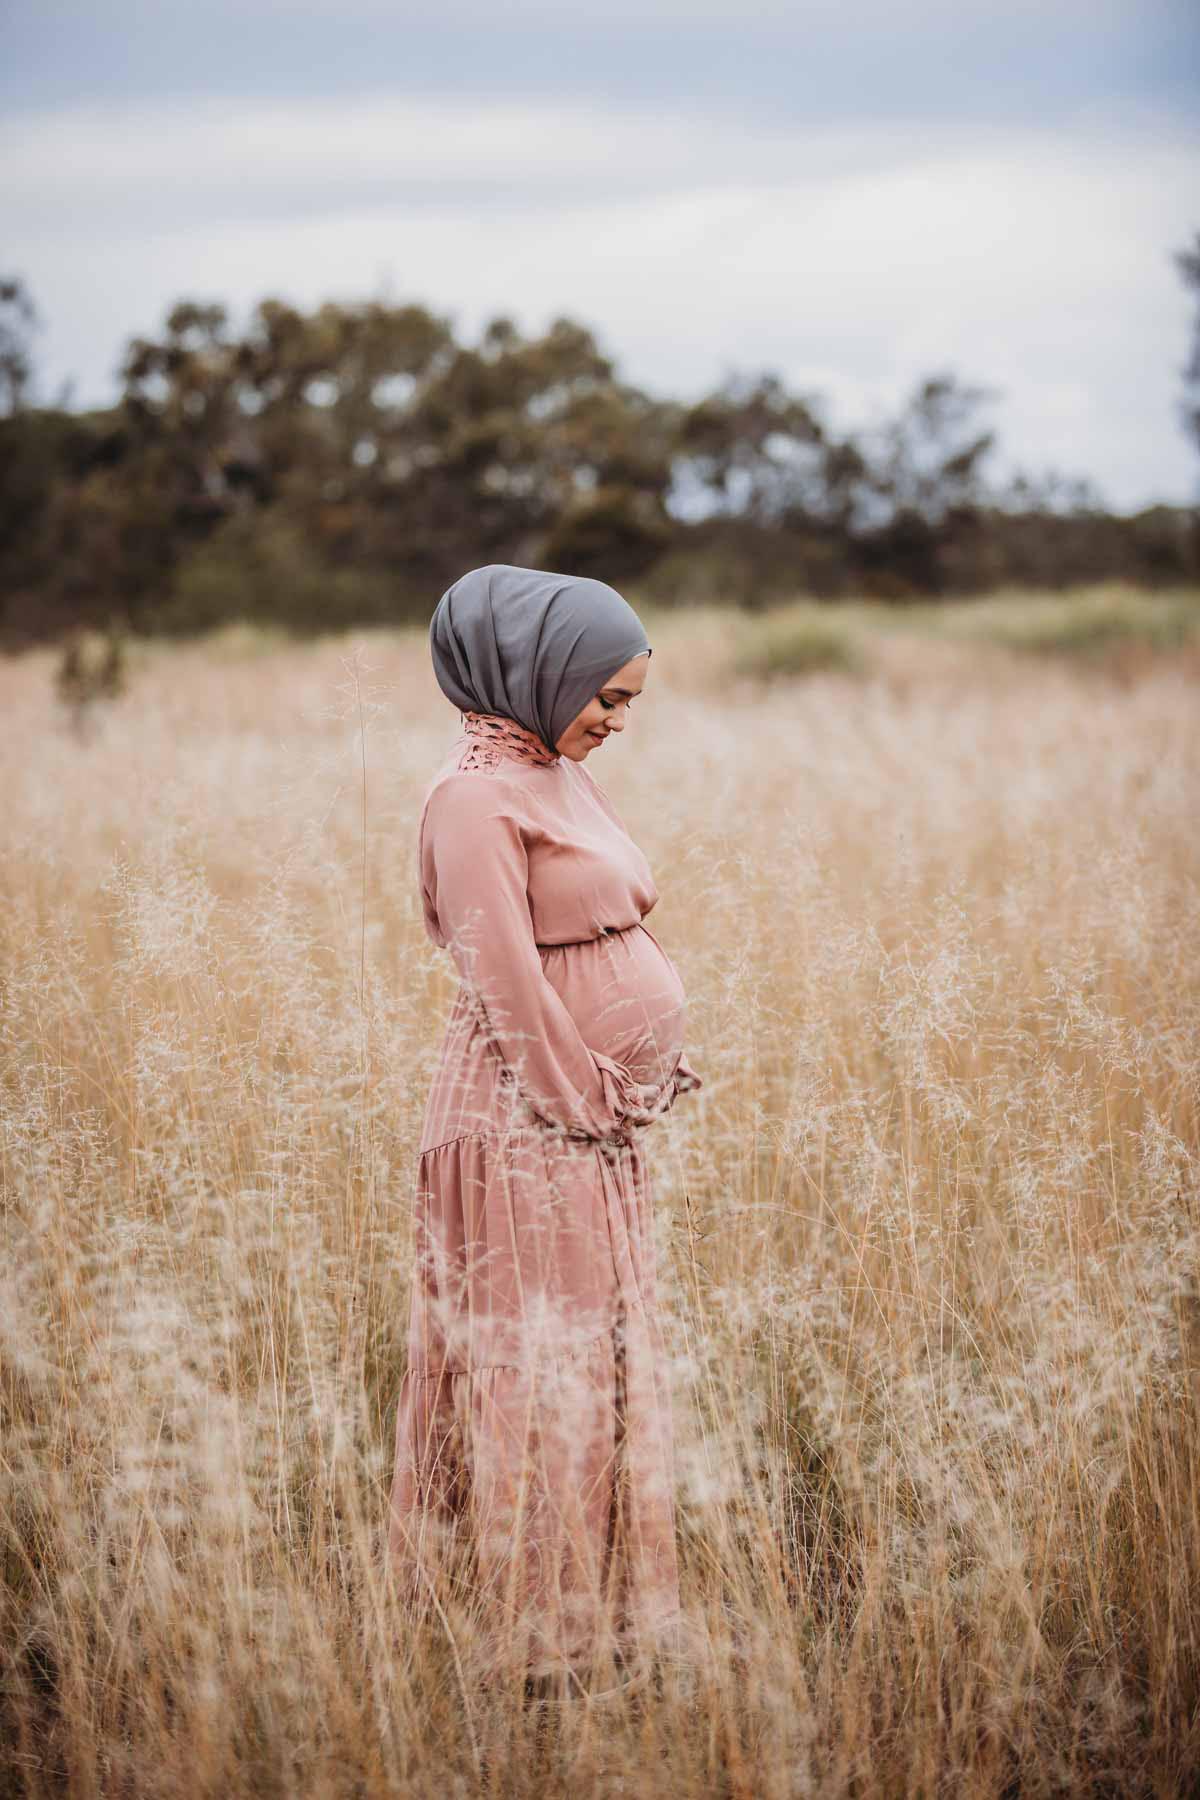 A woman looks down at her pregnant belly as she stands in long grass at sunset